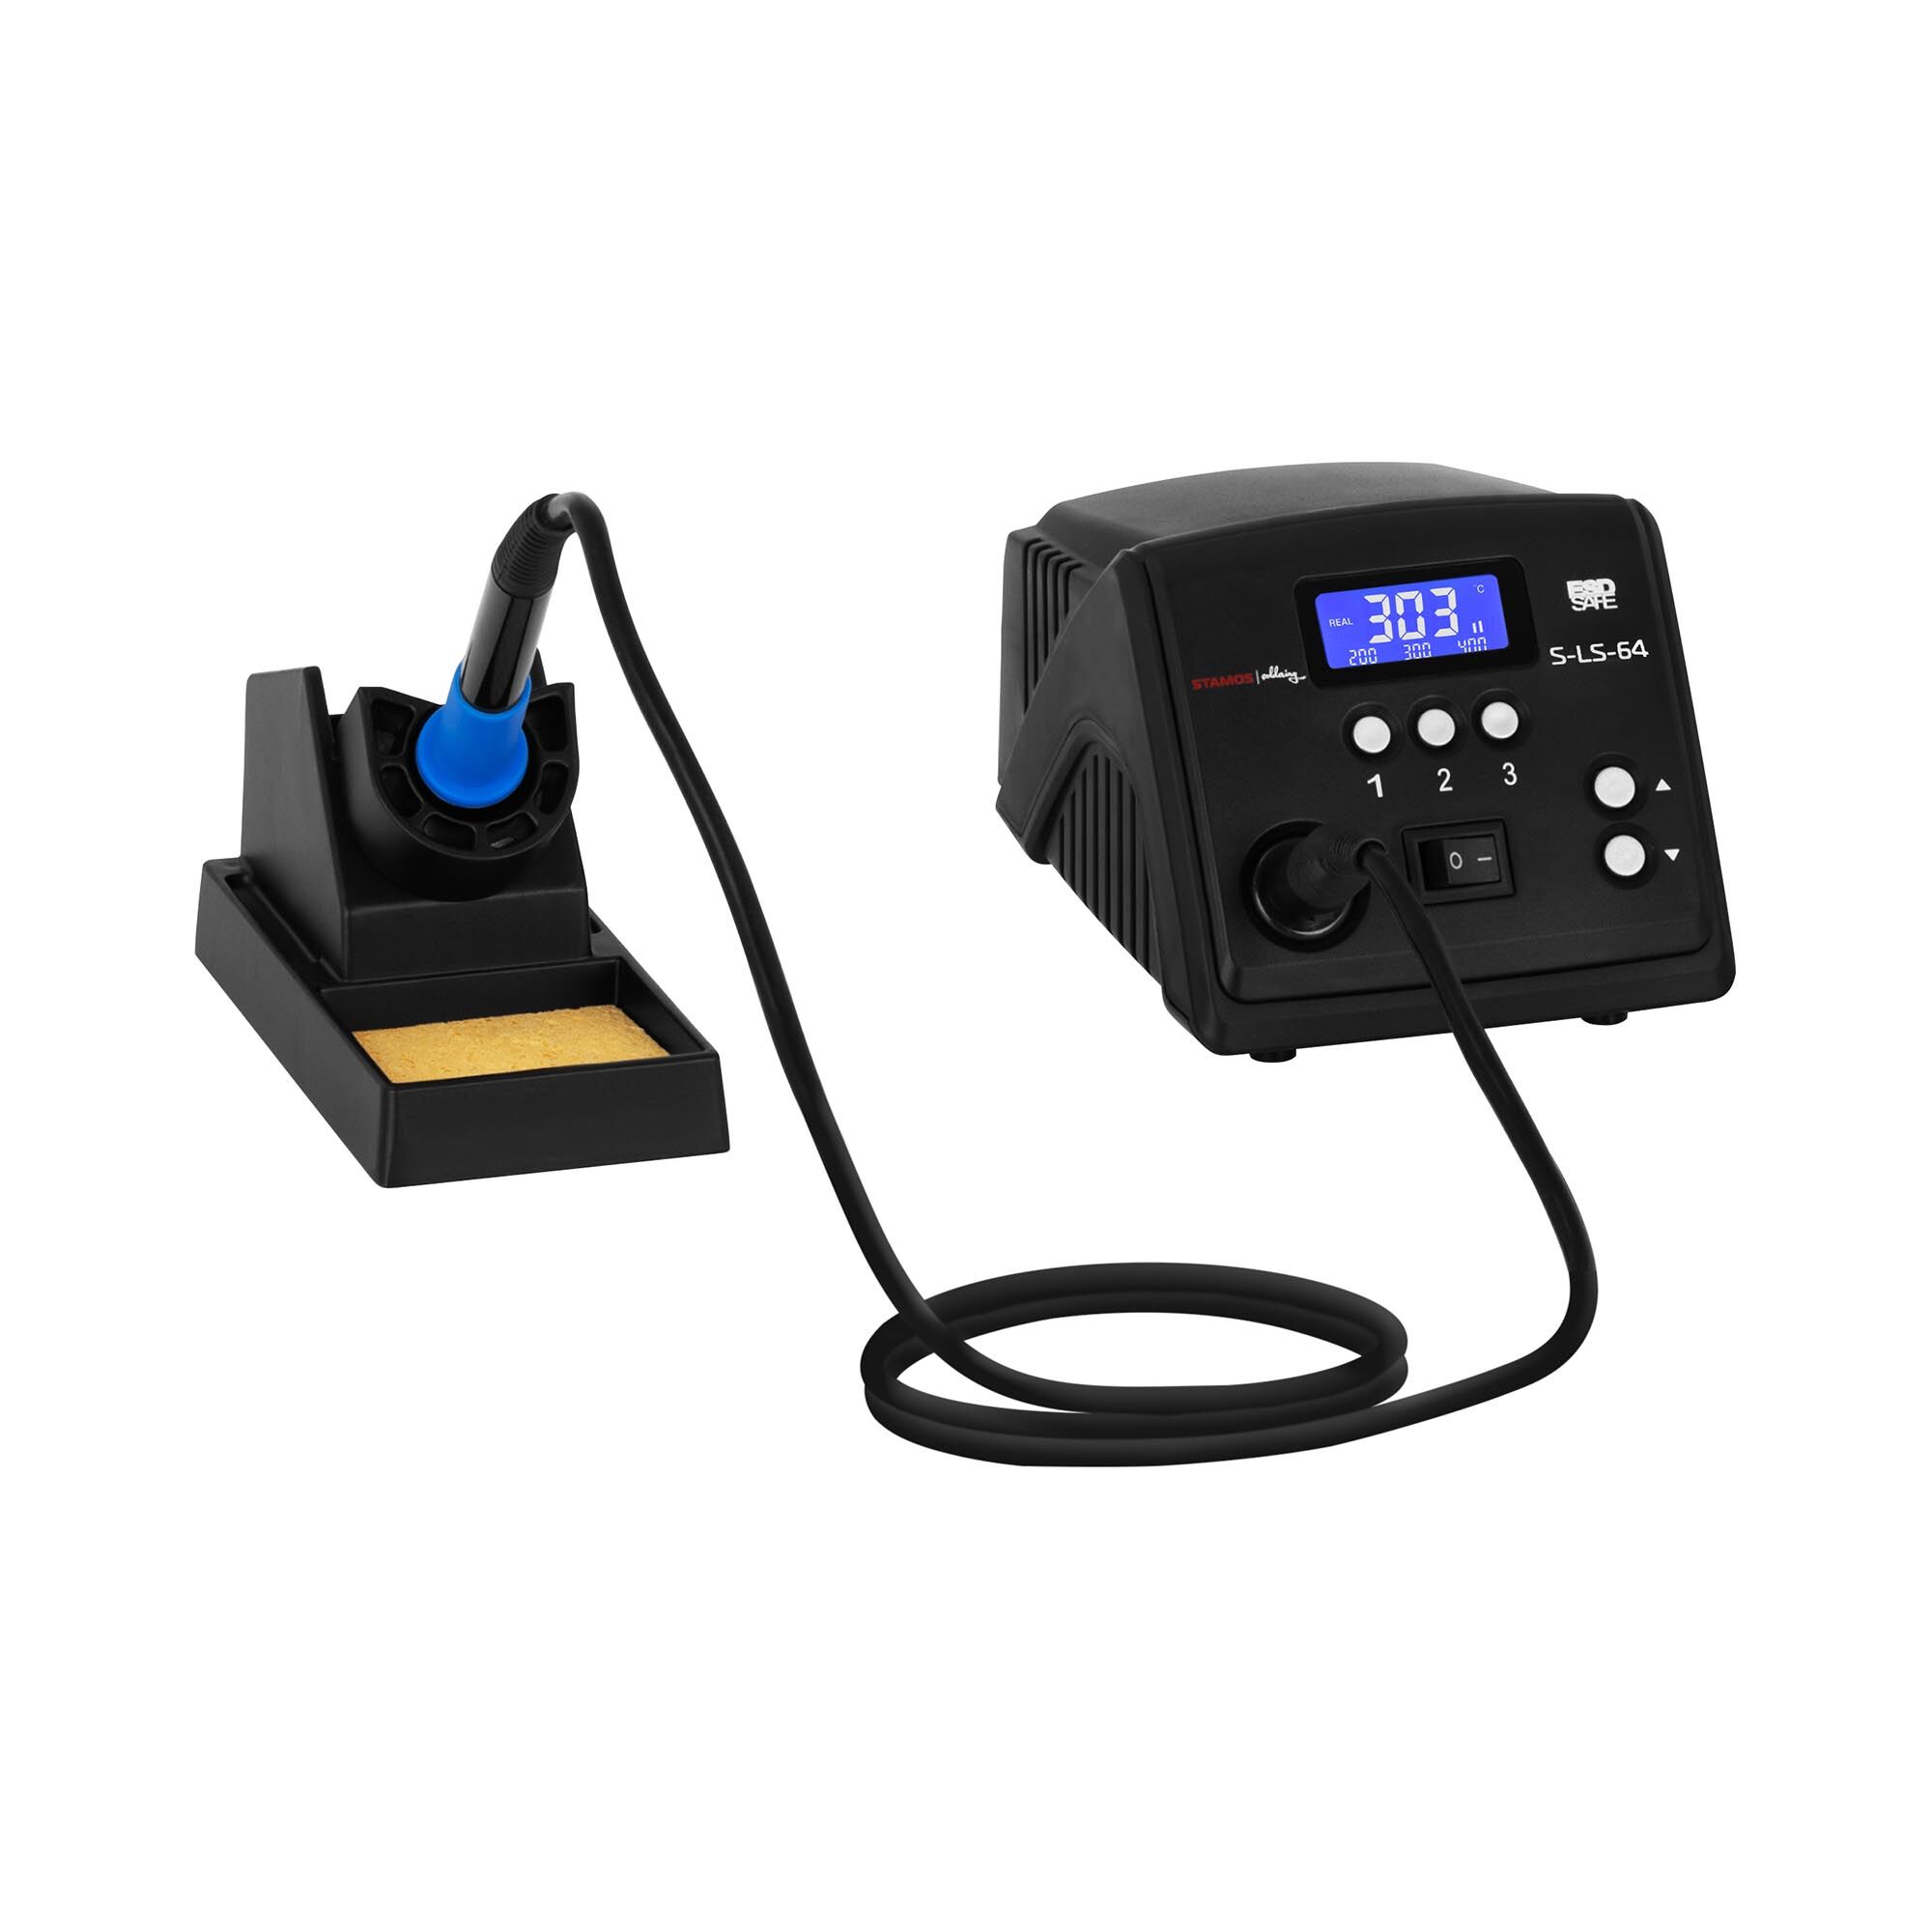 Stamos Soldering Soldering Station - digital - with soldering iron and holder - 80 W - LCD